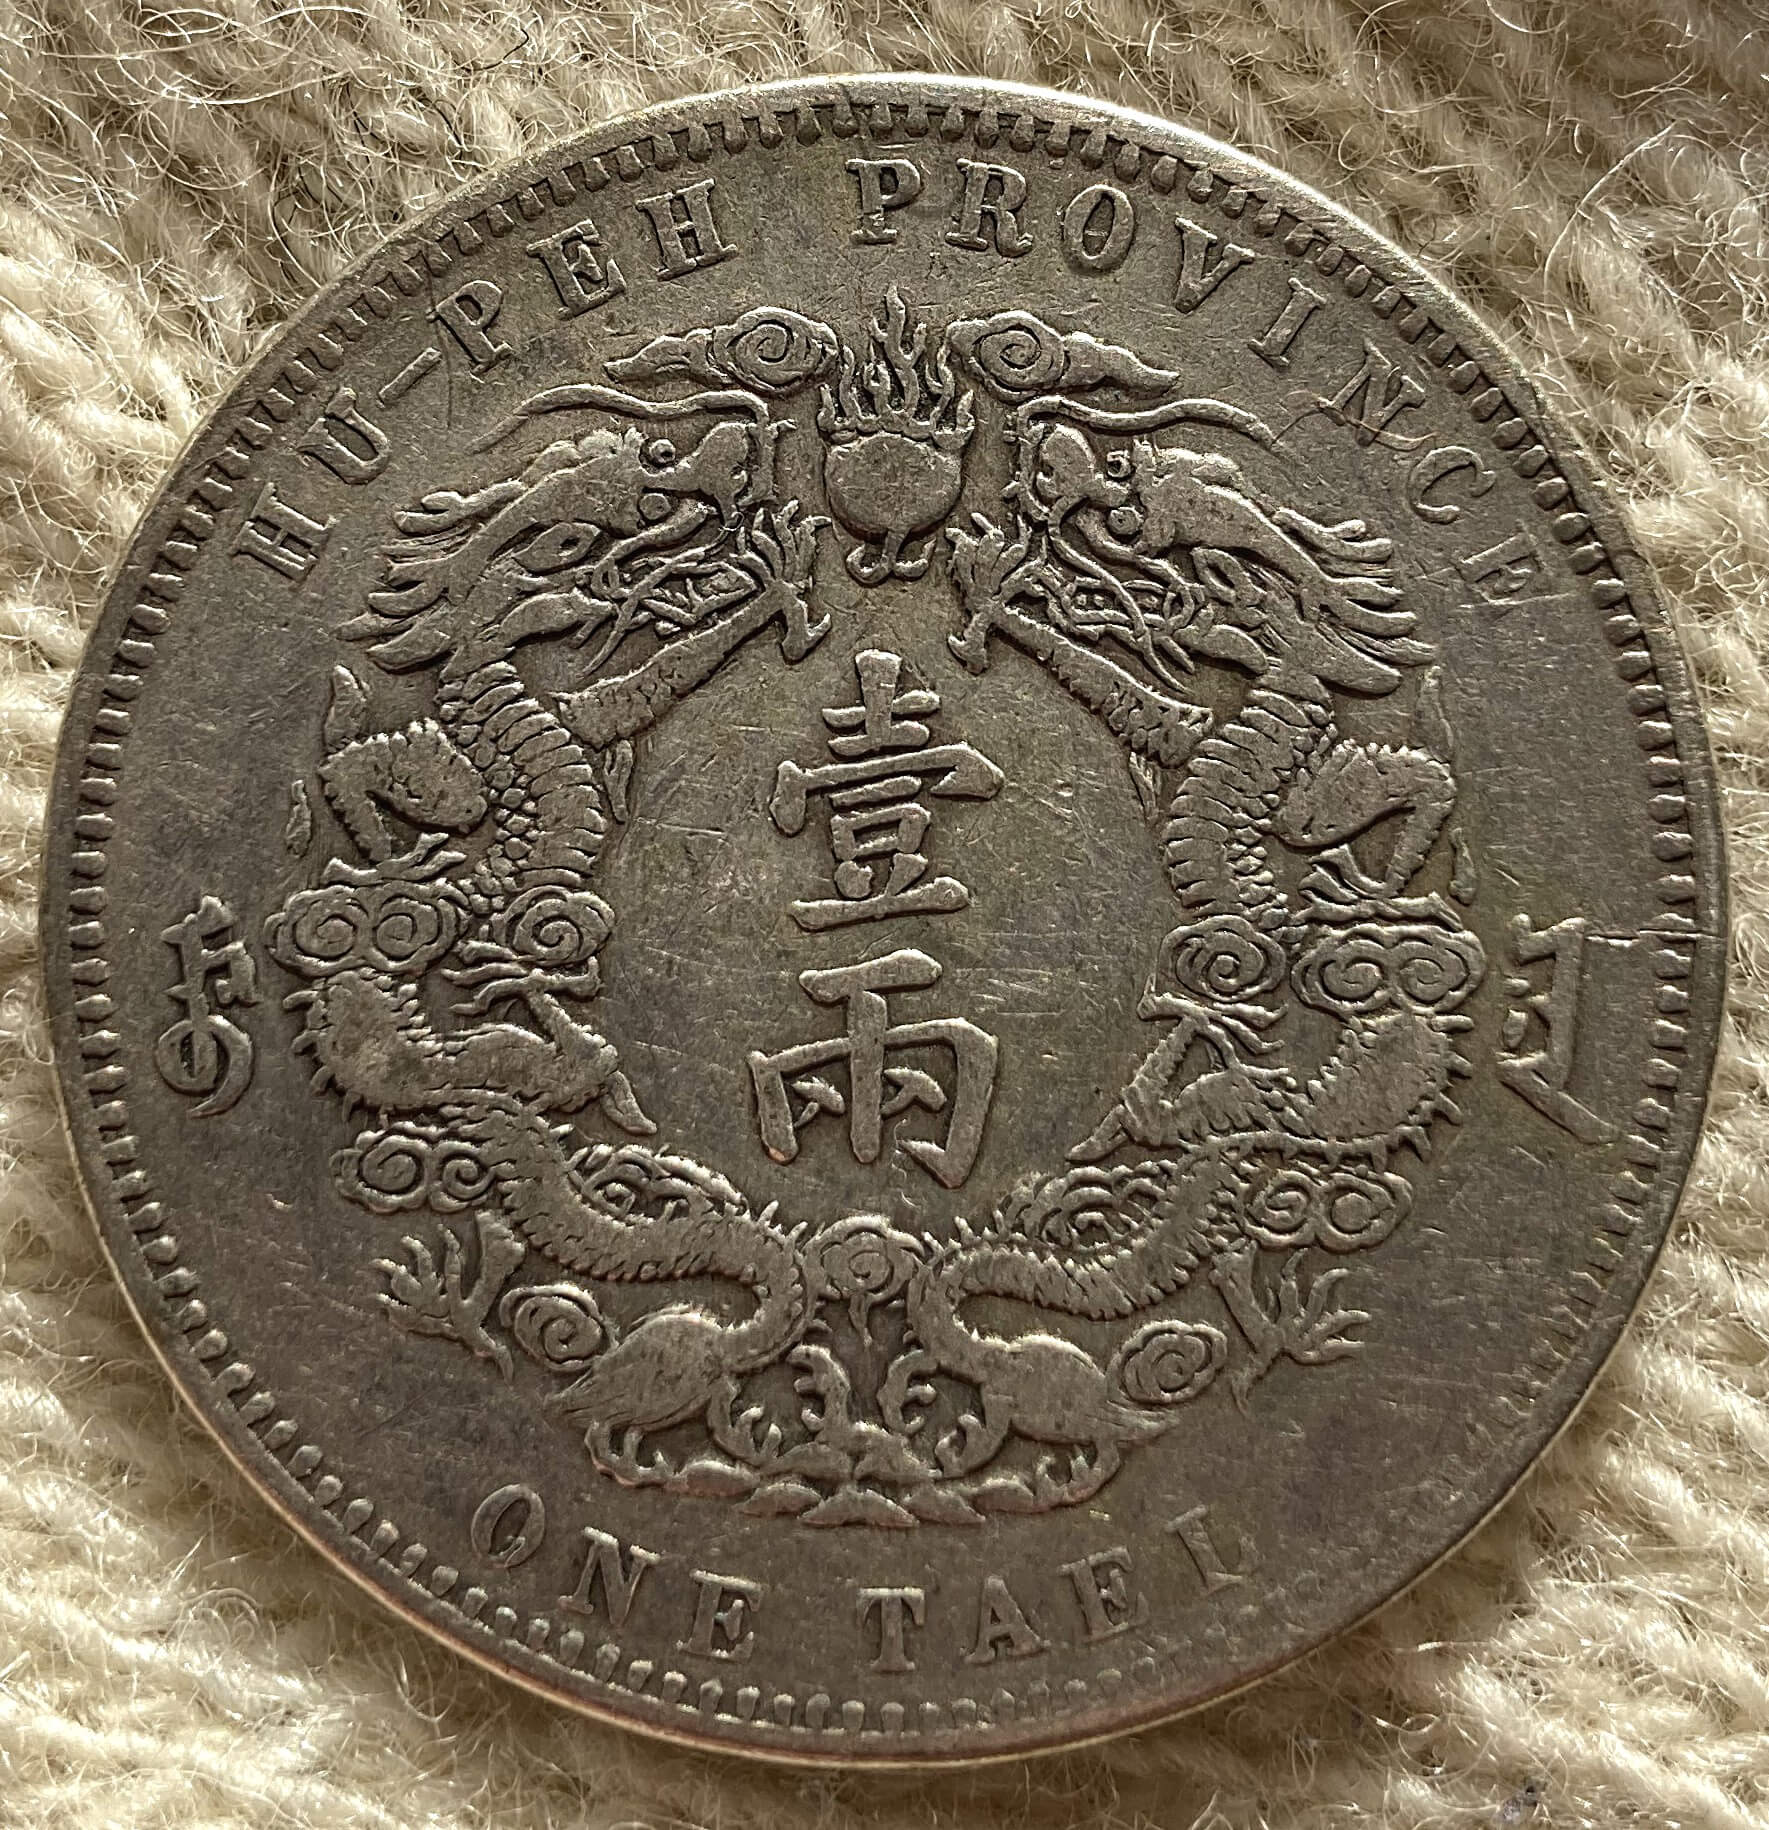 Chinese dragon coin -  France